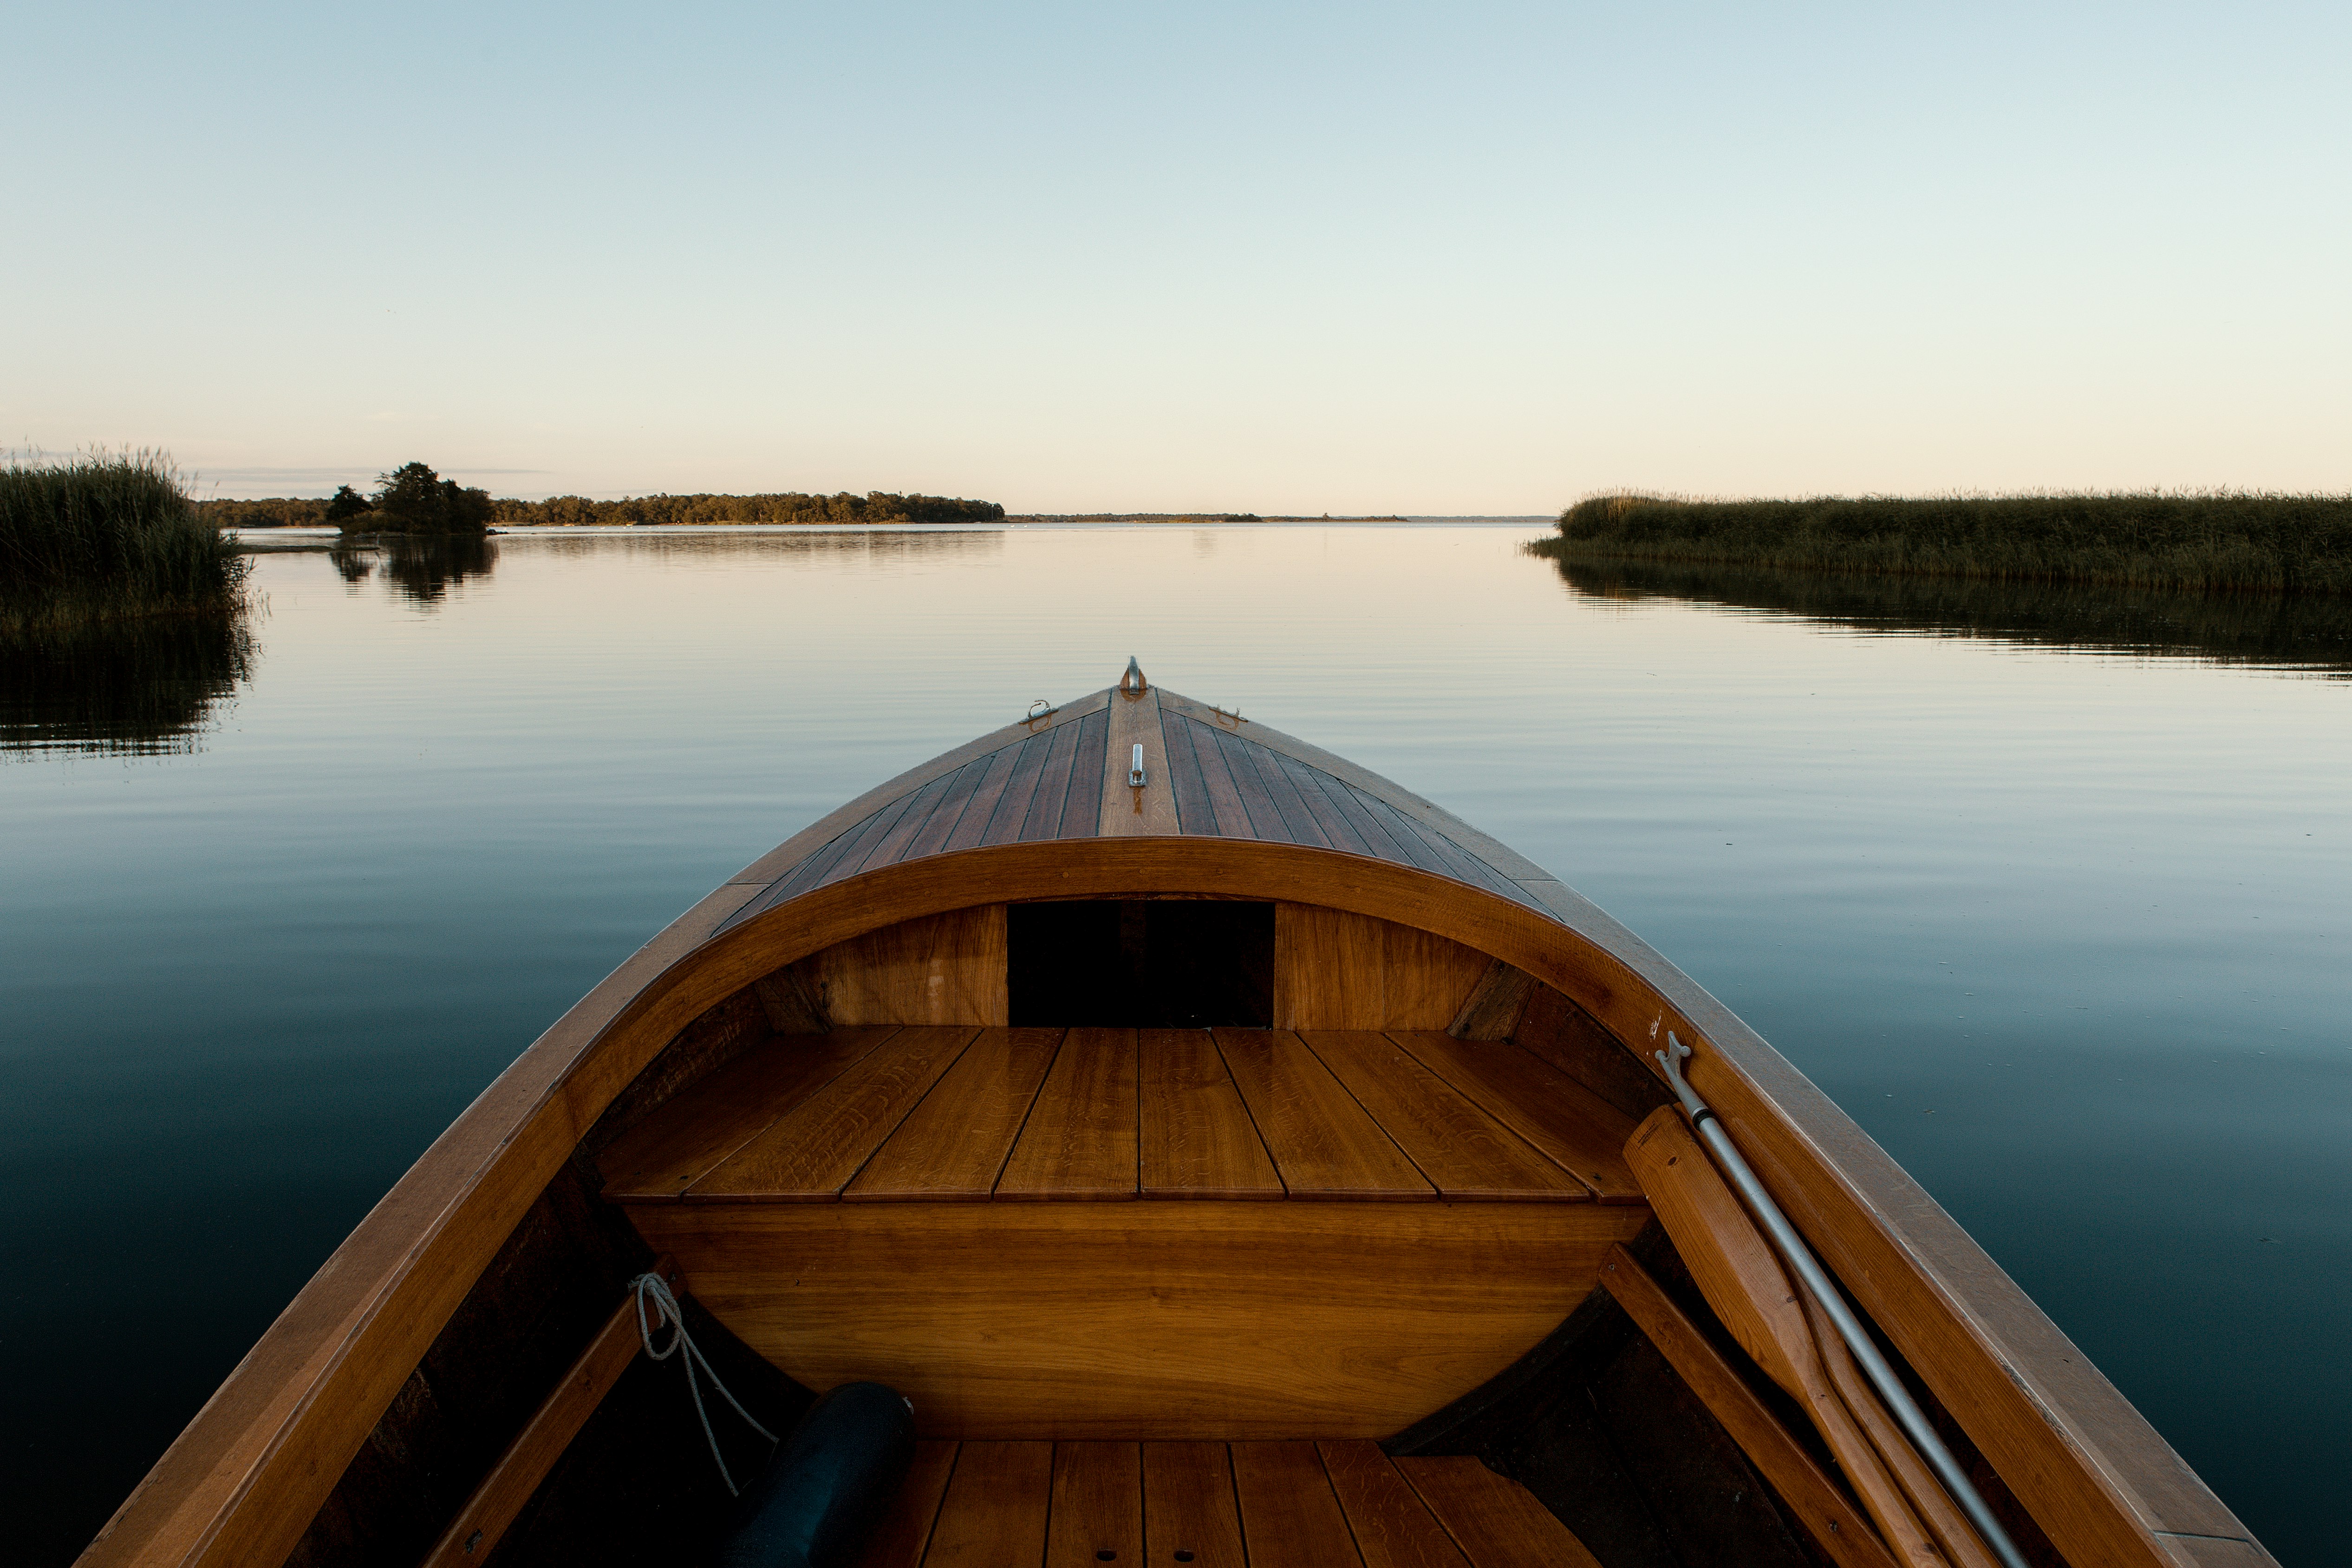 landscape photography of brown boat surrounded by body of water during daytime